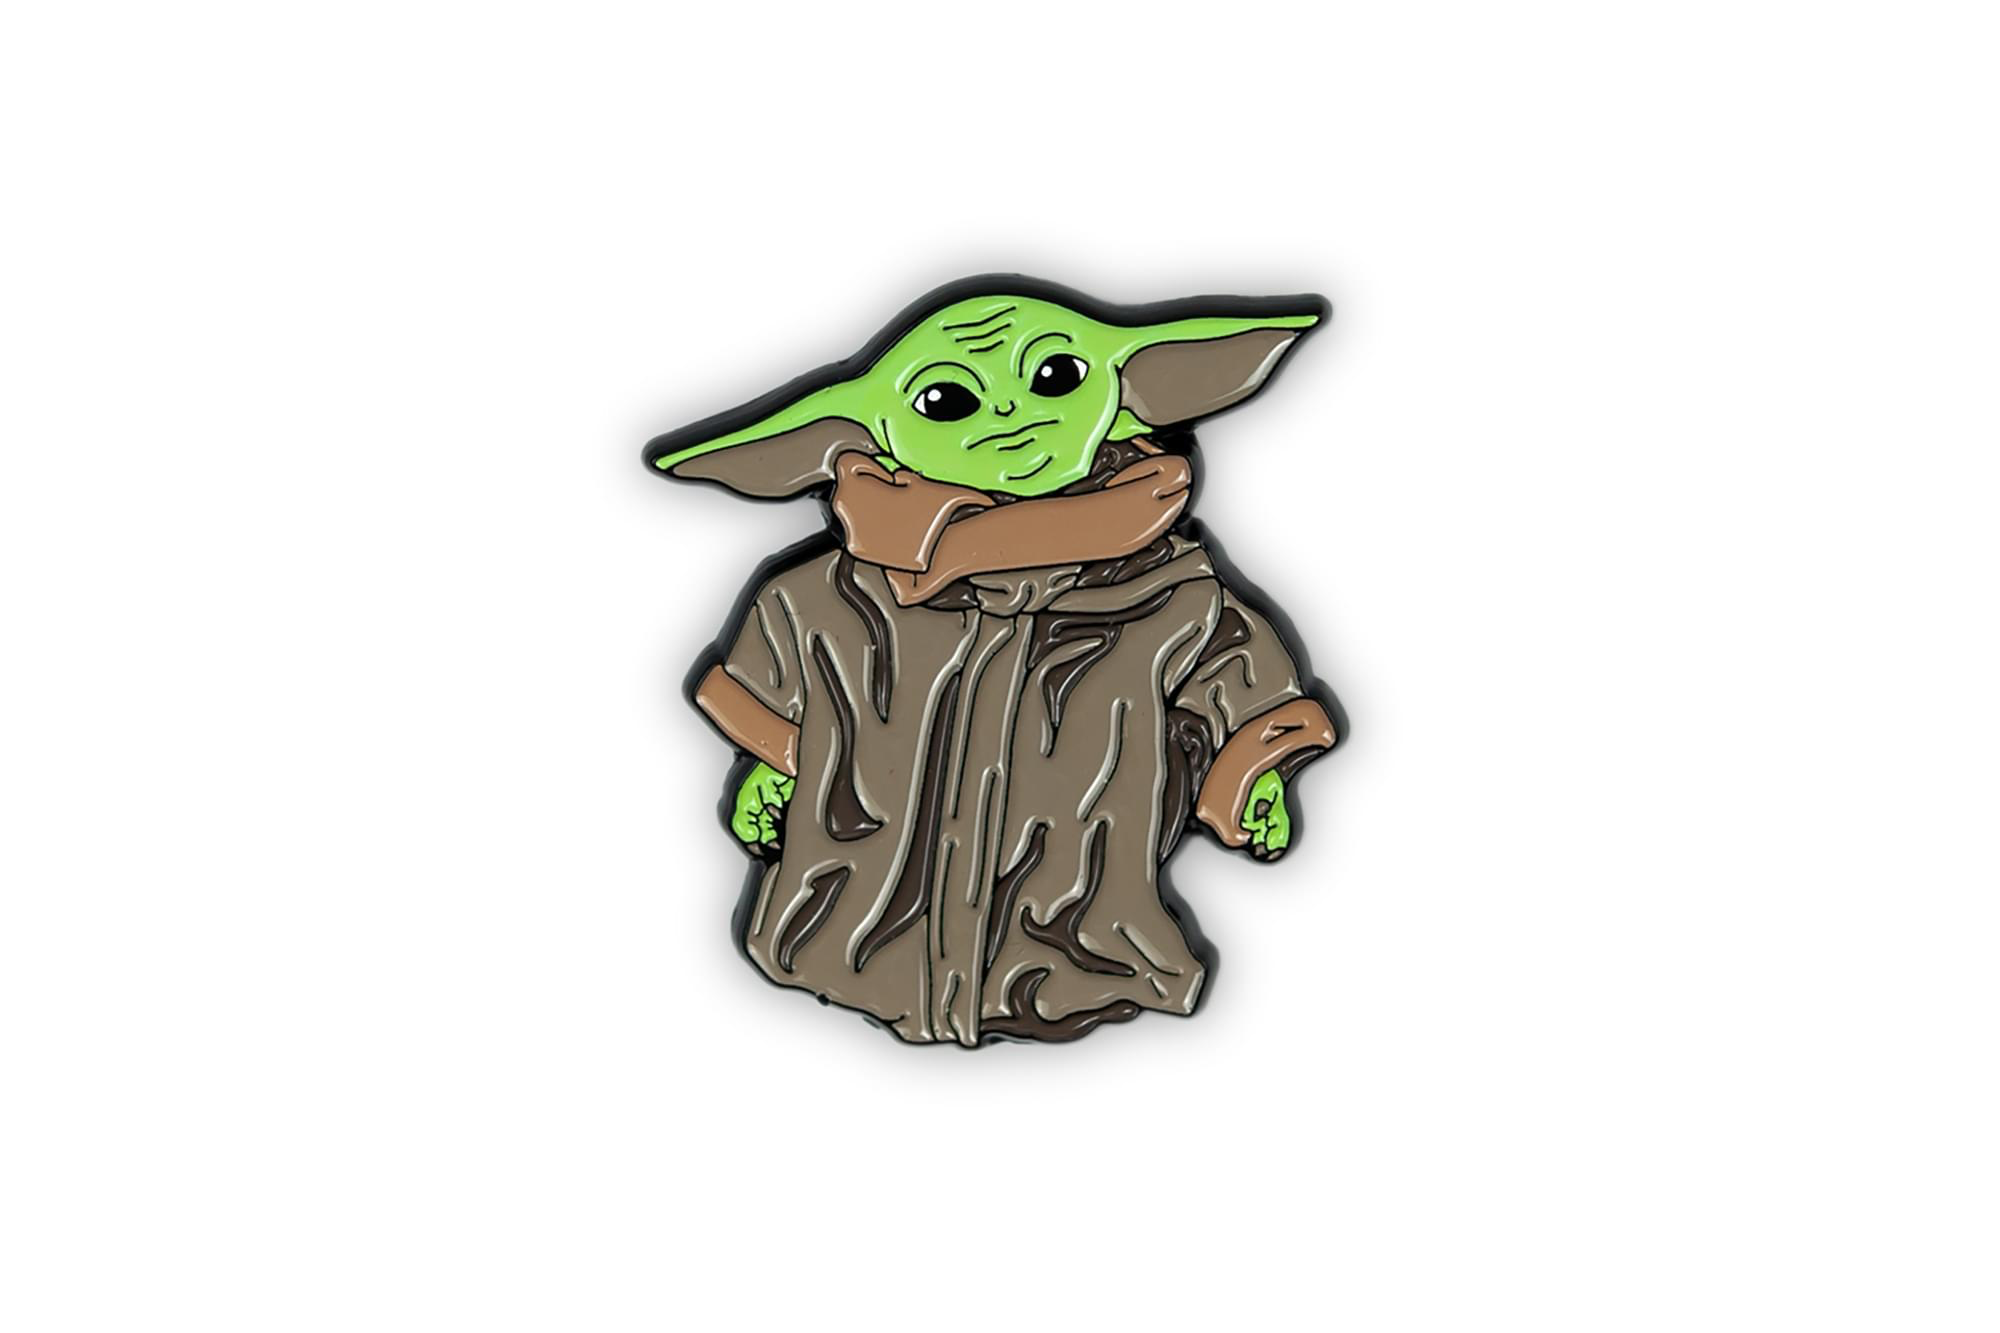 New The Child (Curious Baby Yoda Standing) pin available now!